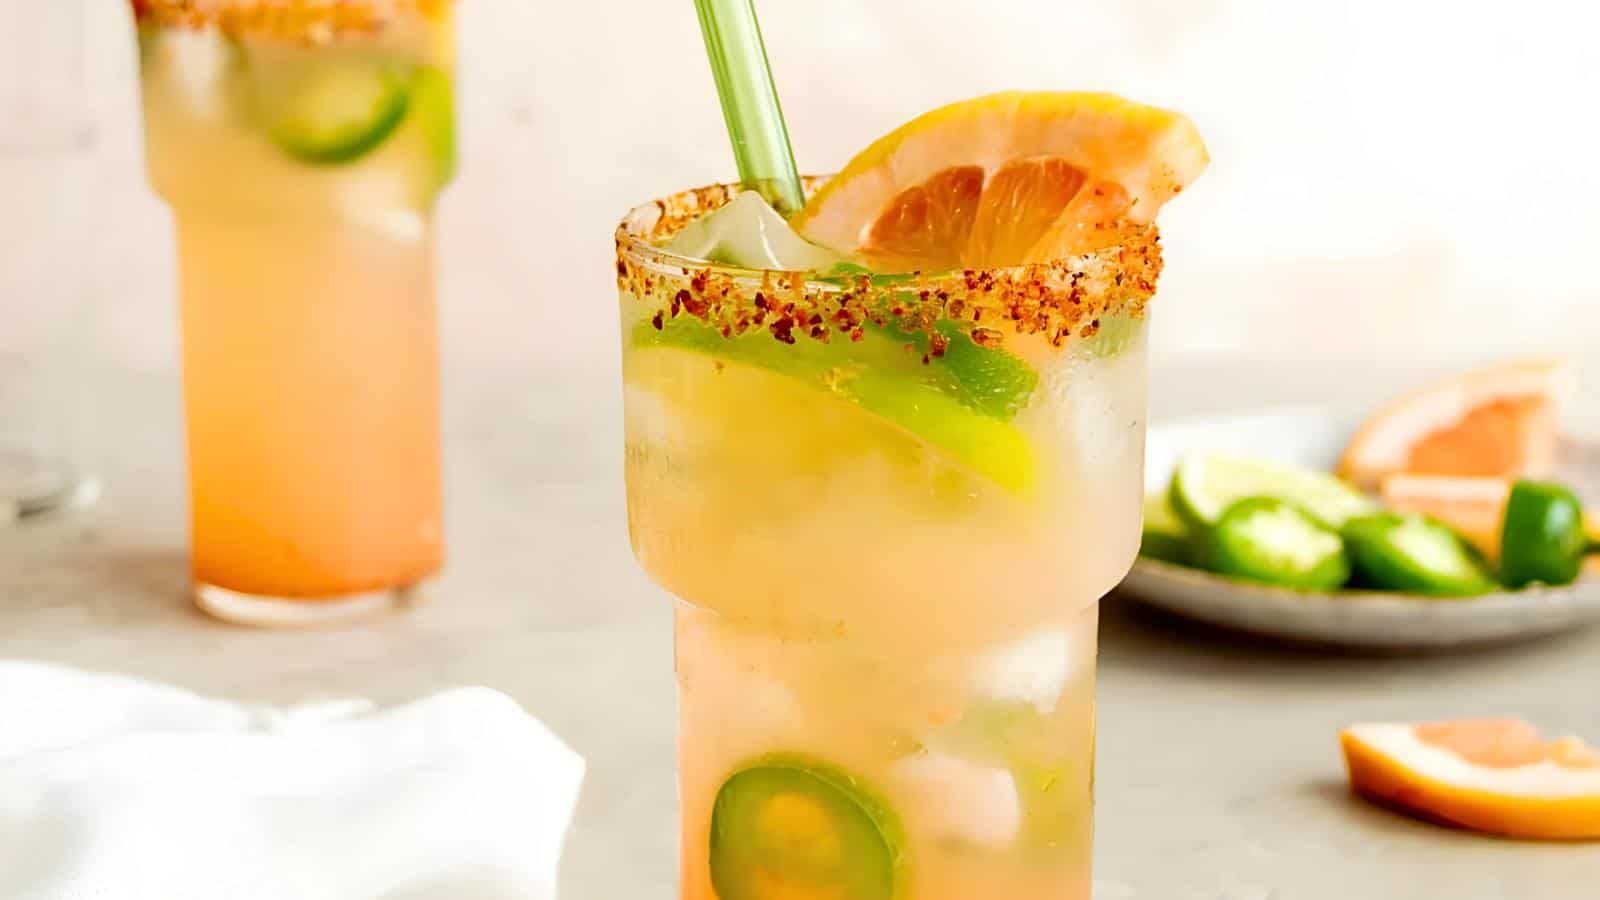 <p>Refresh and invigorate with Spicy Grapefruit Ranch Water. This tequila-based summer cocktail mixes grapefruit and jalapeño for a zesty twist. It’s the perfect balance of tangy and spicy.<br><strong>Get the Recipe: </strong><a href="https://littleblackskillet.com/spicy-grapefruit-ranch-water-tequila-cocktail/?utm_source=msn&utm_medium=page&utm_campaign=msn" rel="noopener">Spicy Grapefruit Ranch Water</a></p>